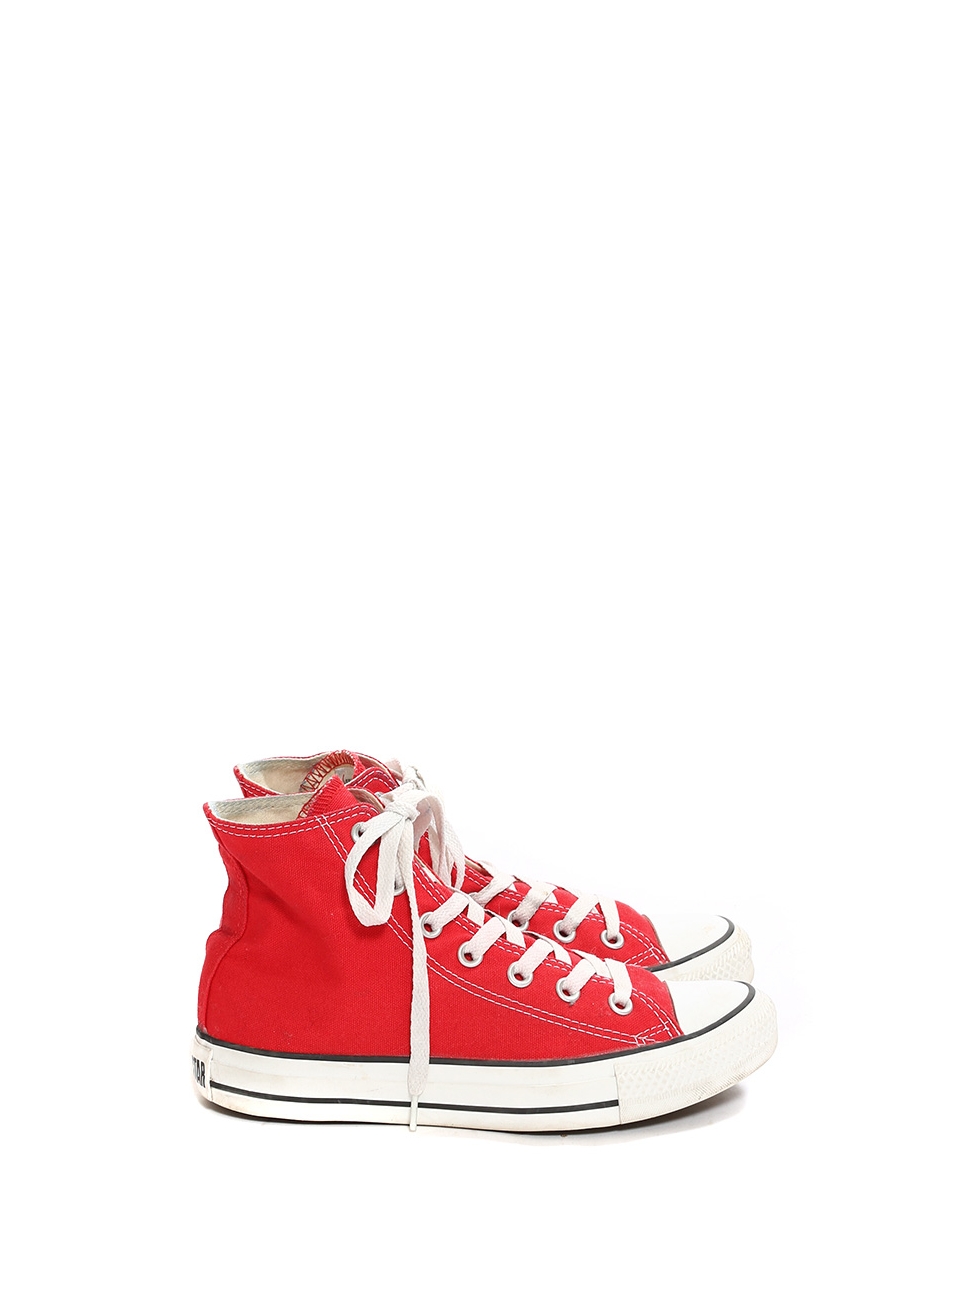 Boutique CONVERSE Chuck Taylor Classic All Star red high sneakers Size 37